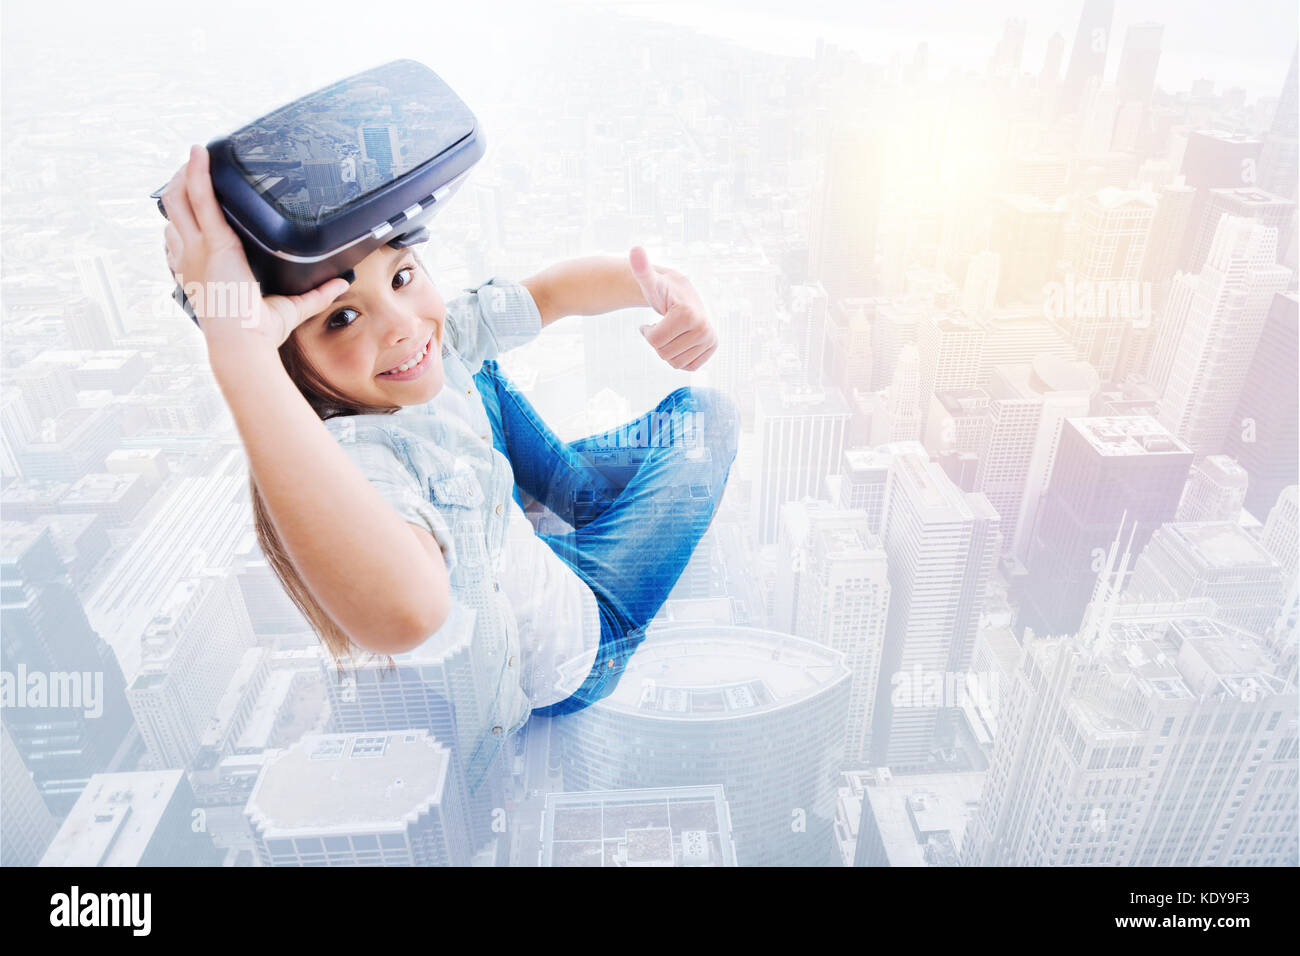 Cute girl showing thumbs up while removing VR headset Stock Photo